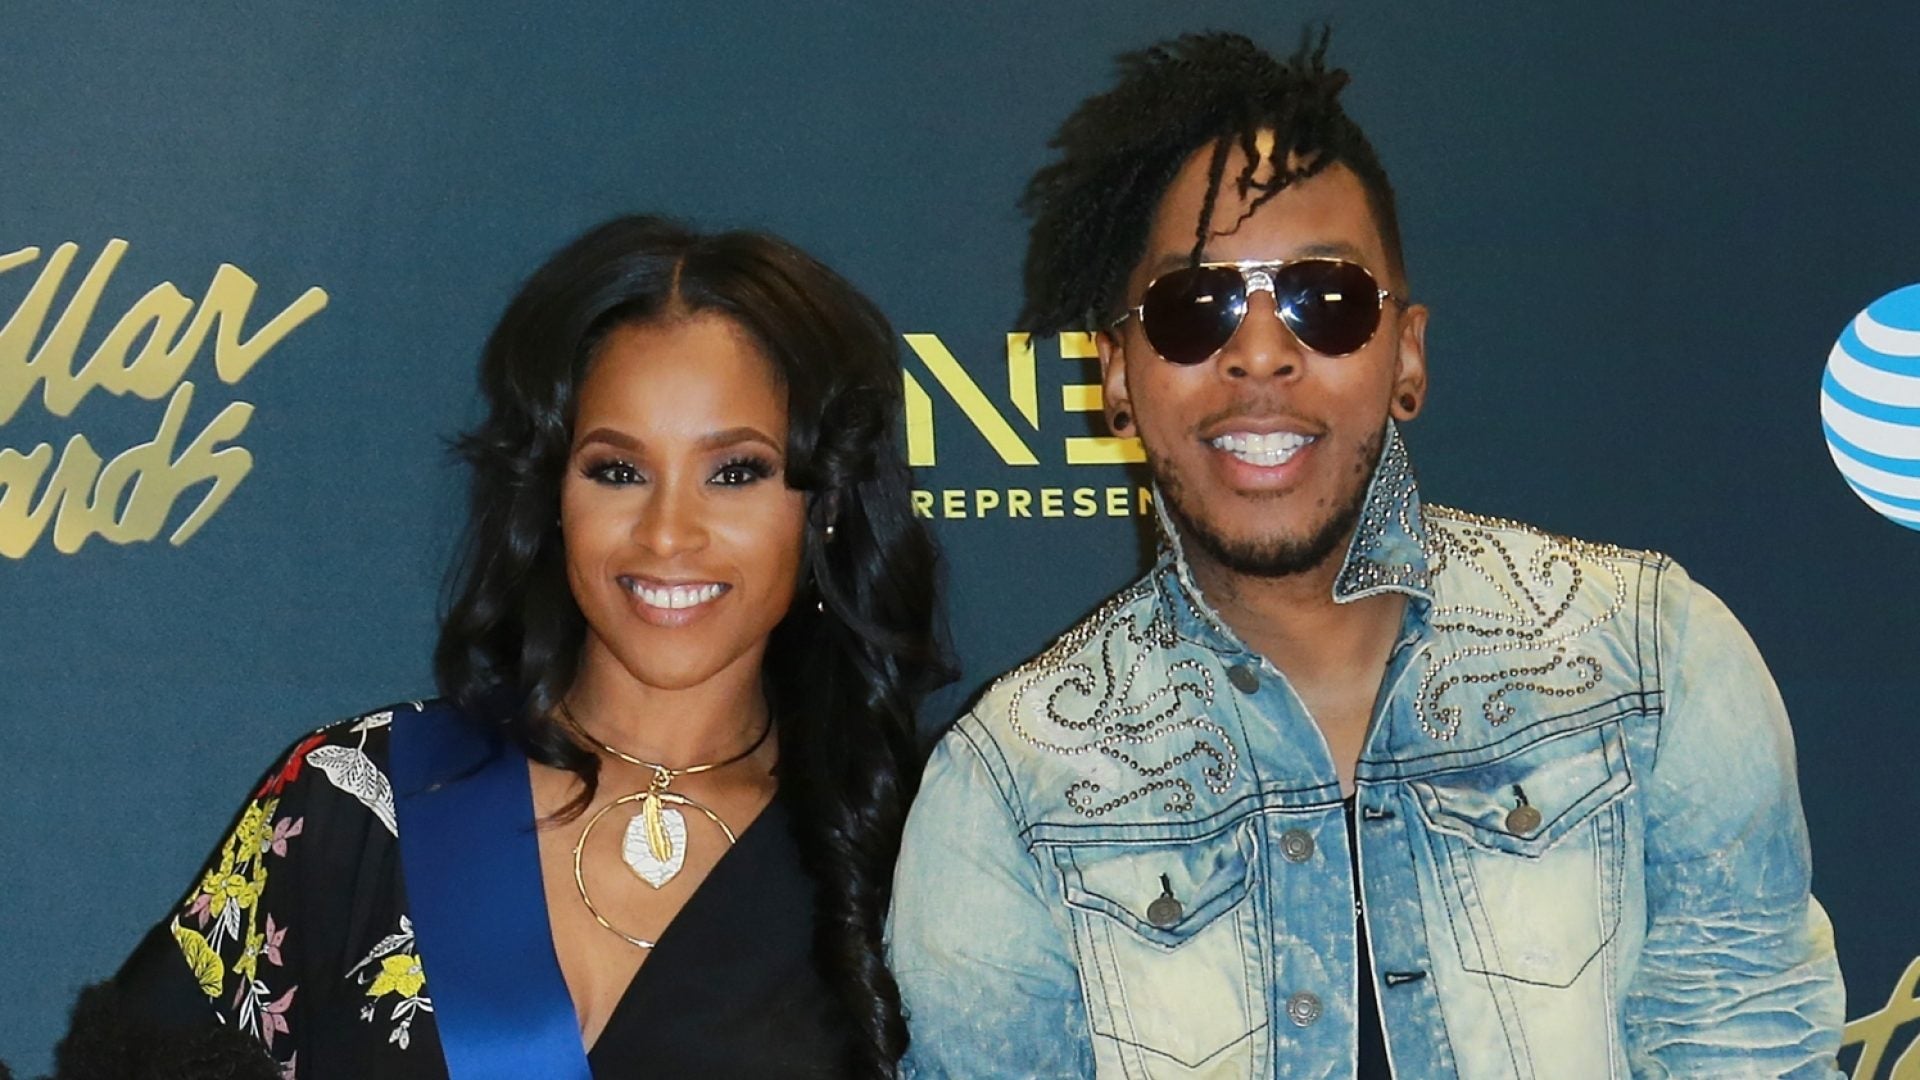 'Disagree Without Disrespect':Deitrick Haddon Responds To Critics Of His Wife Twerking On Him At His 50th Birthday Party